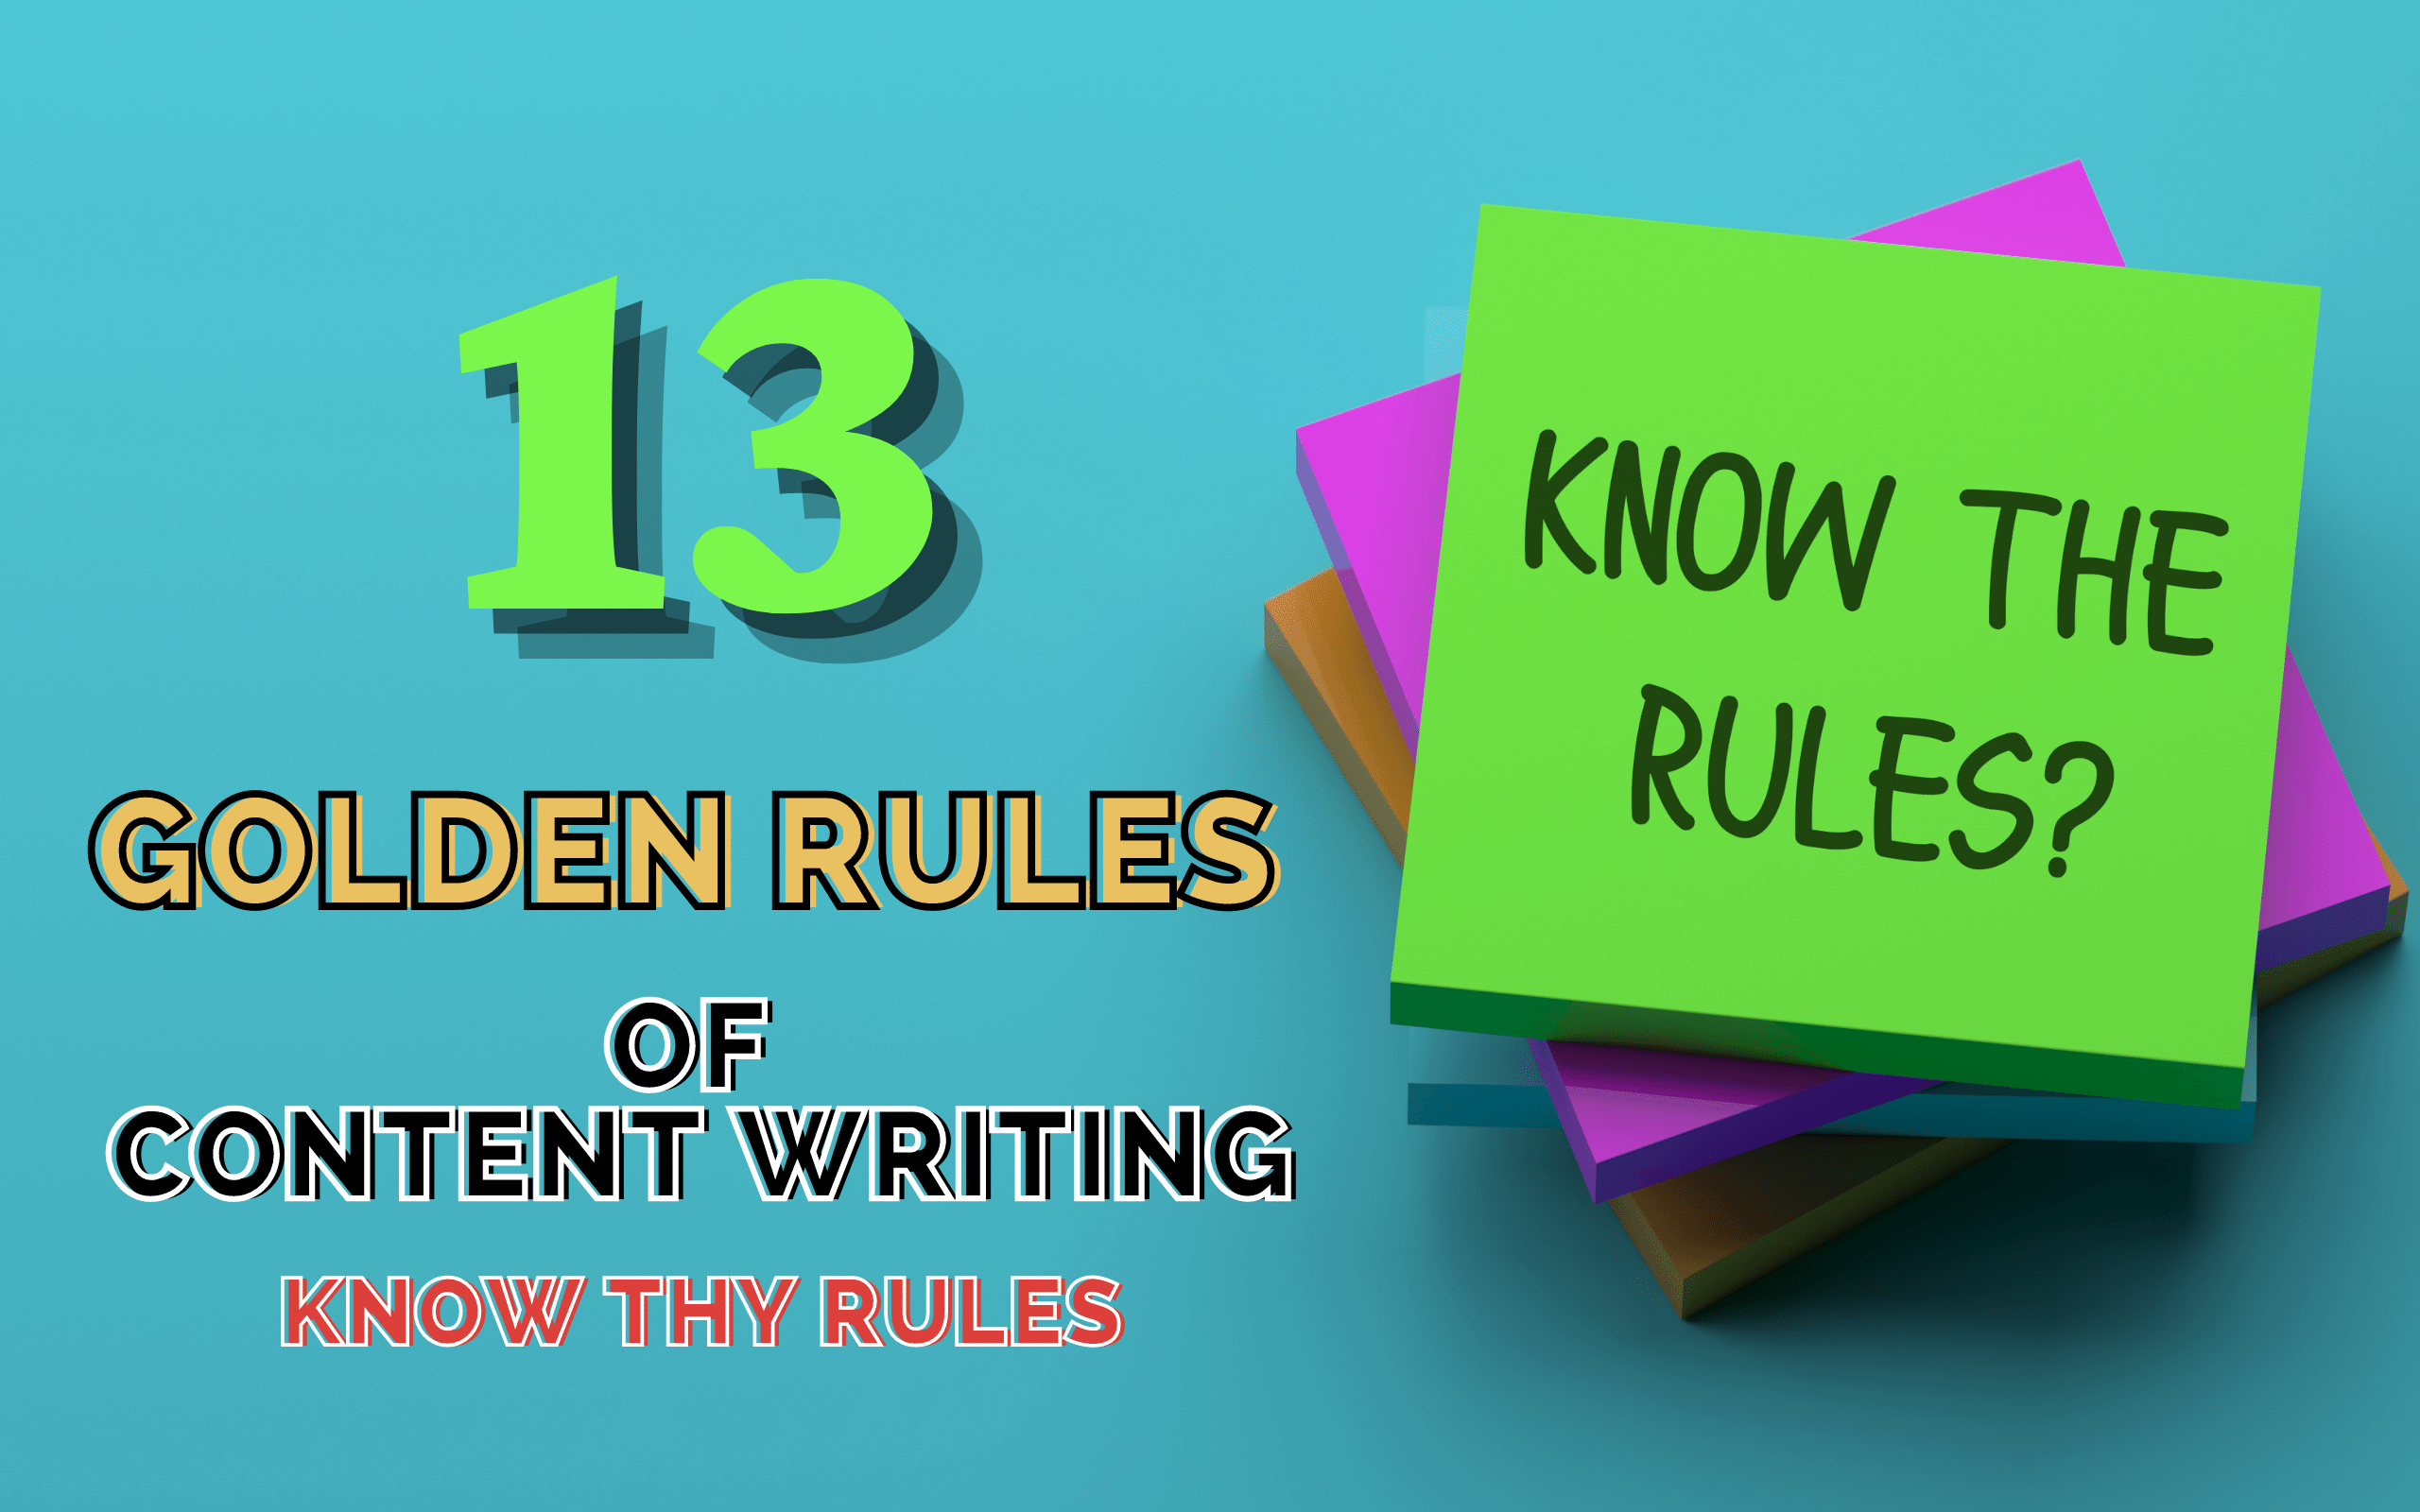 Golden rules of content writing